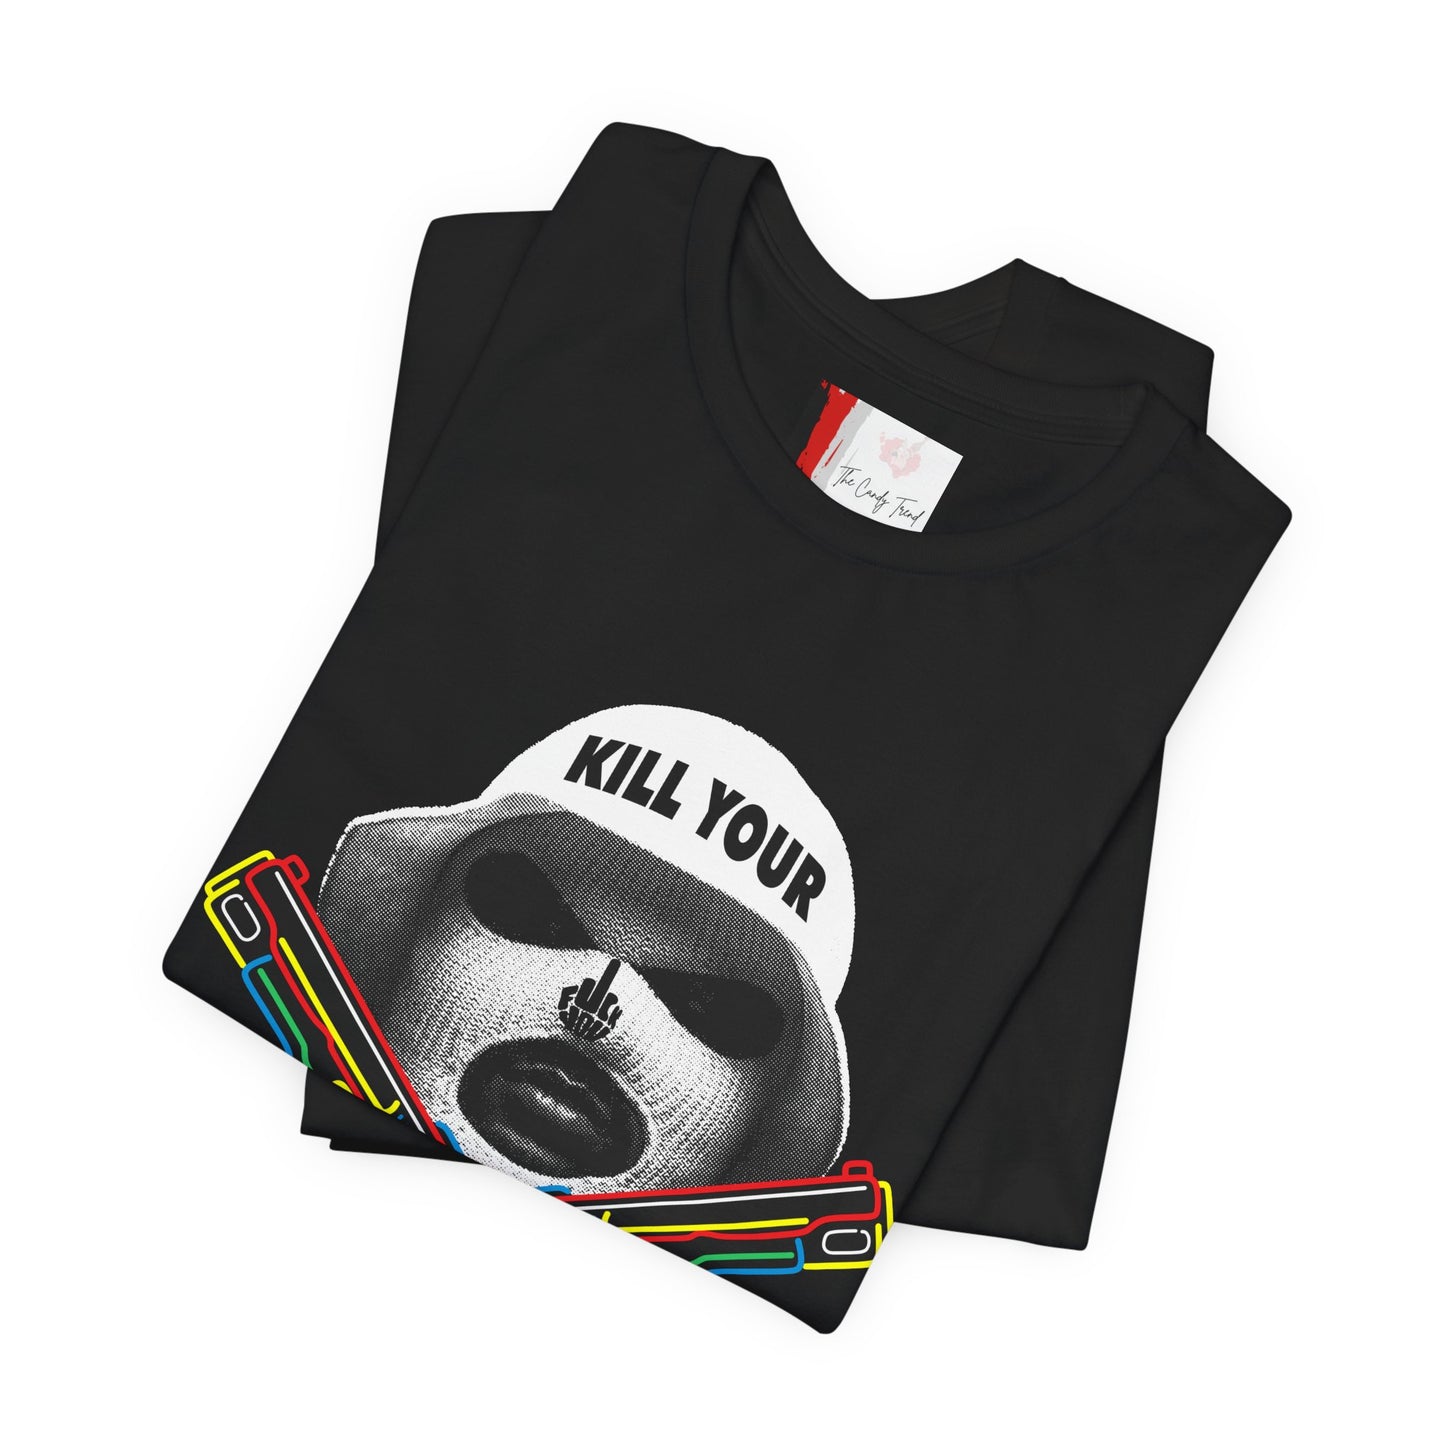 KILL YOUR EGO GRAPHIC T-SHIRT